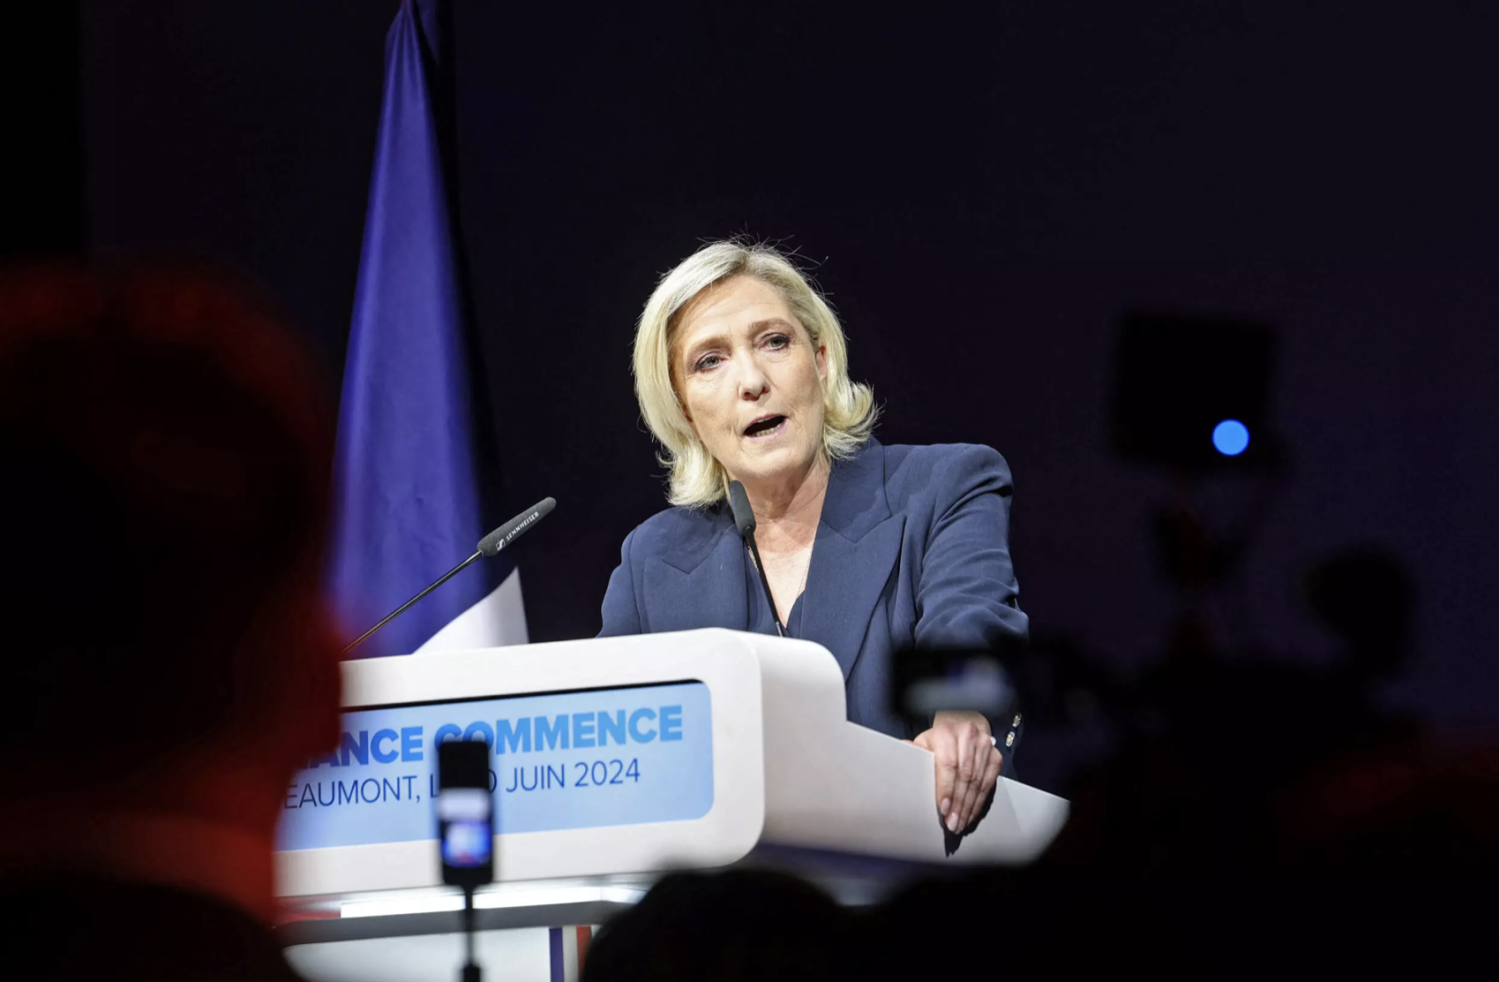 Far-right leader Marine Le Pen addresses supporters in her northern constituency of Henin-Beaumont, where she was re-elected in the first round with more than 50% of the vote. © François Lo Presti, AFP